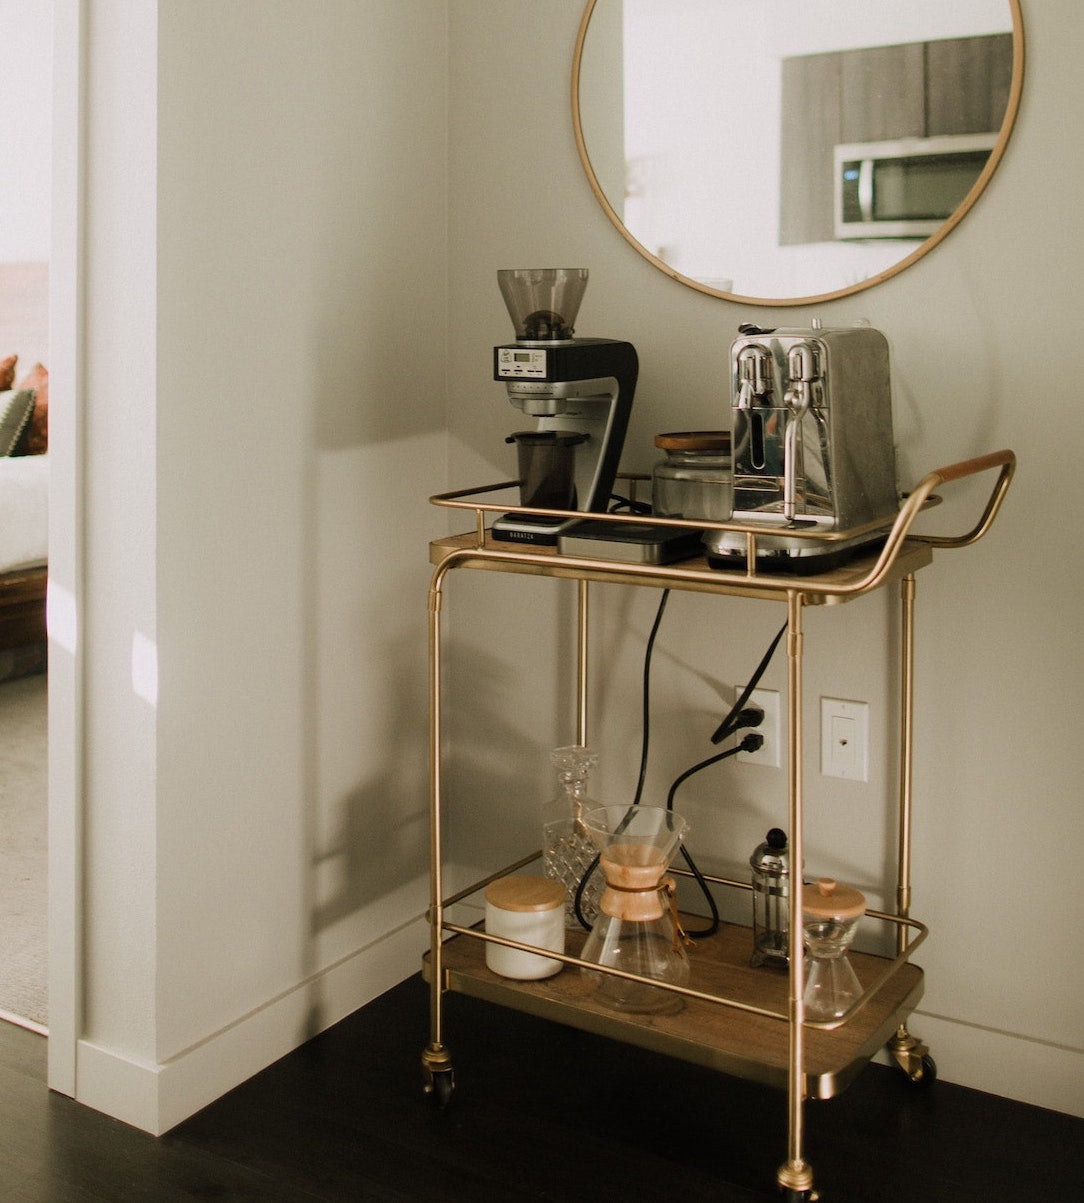 How to create a coffee bar in your home